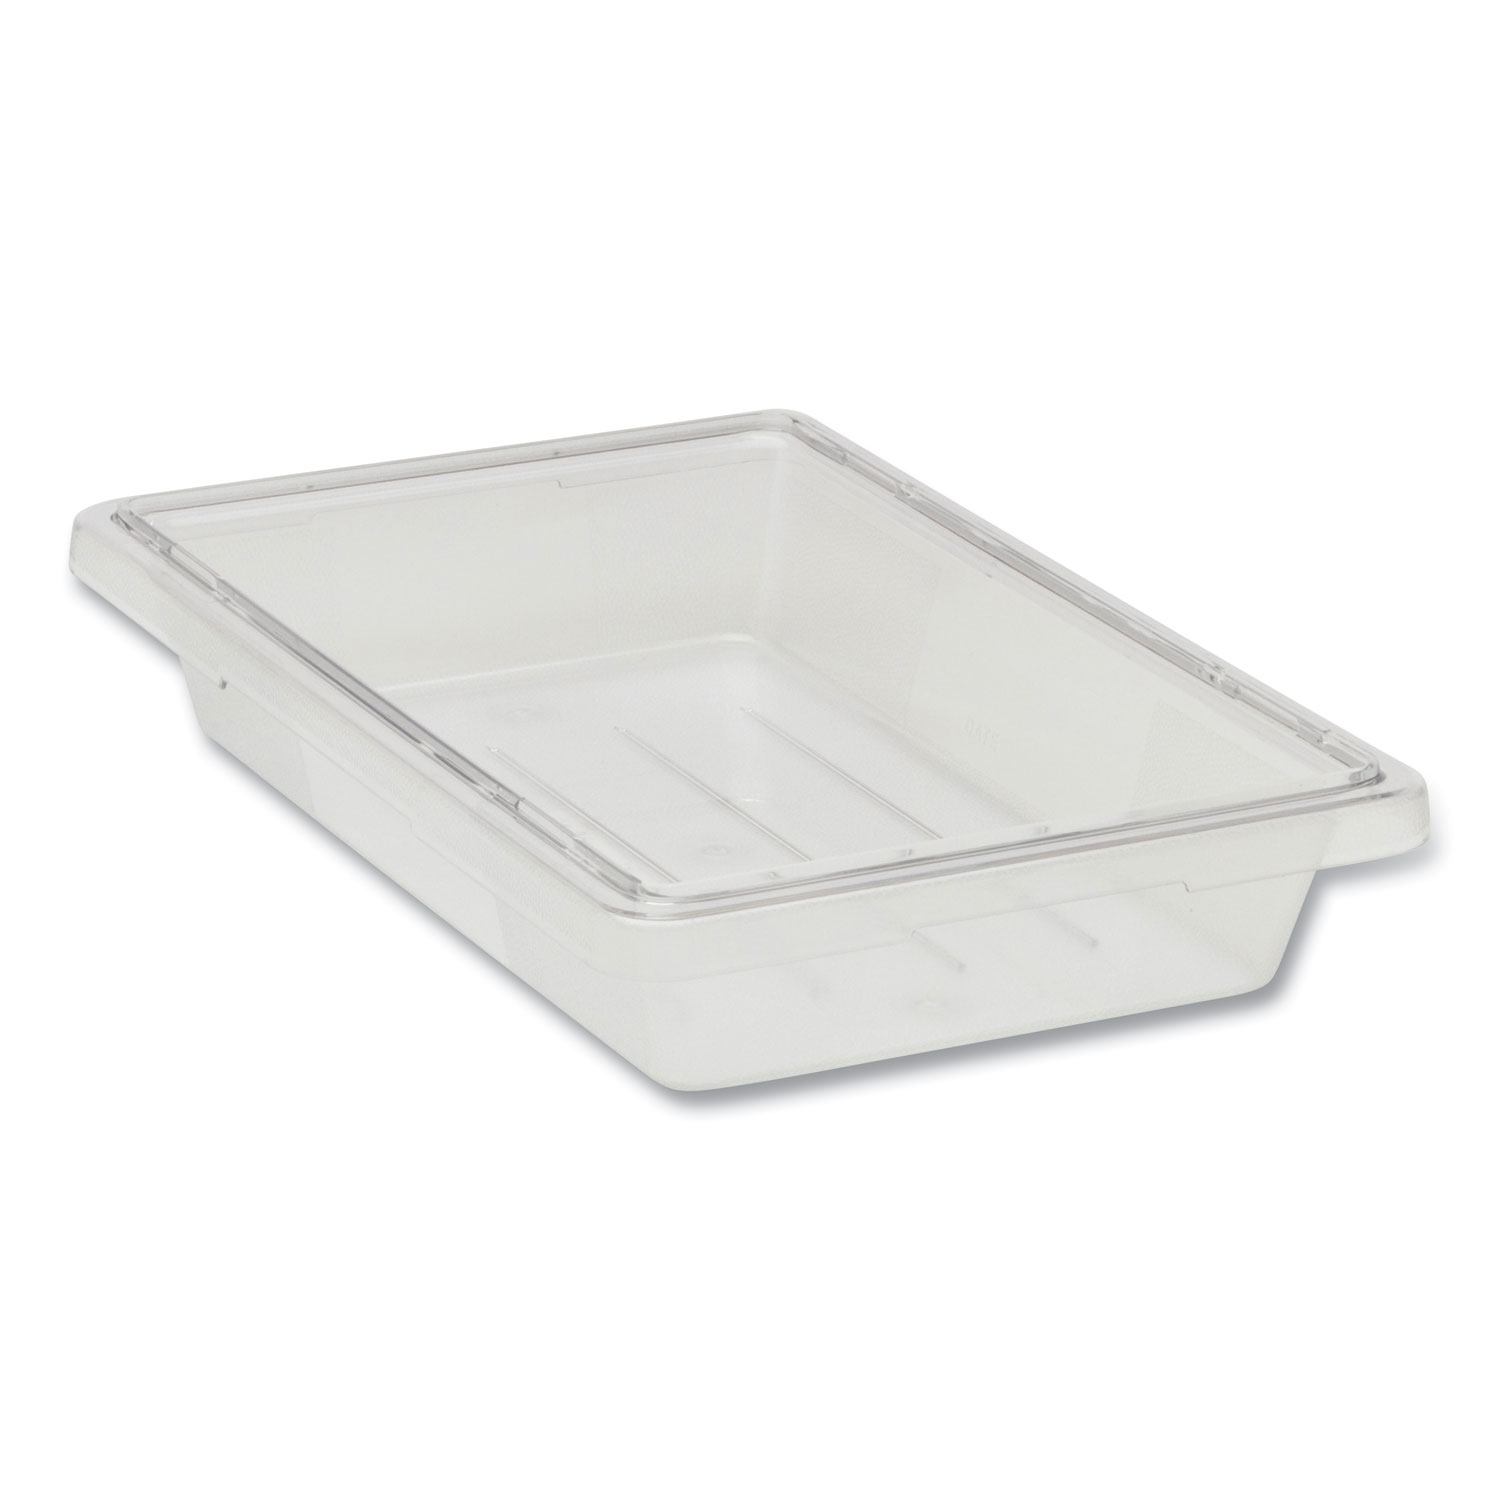 Plastic Storage Containers - Commercial Plastic Storage Solutions